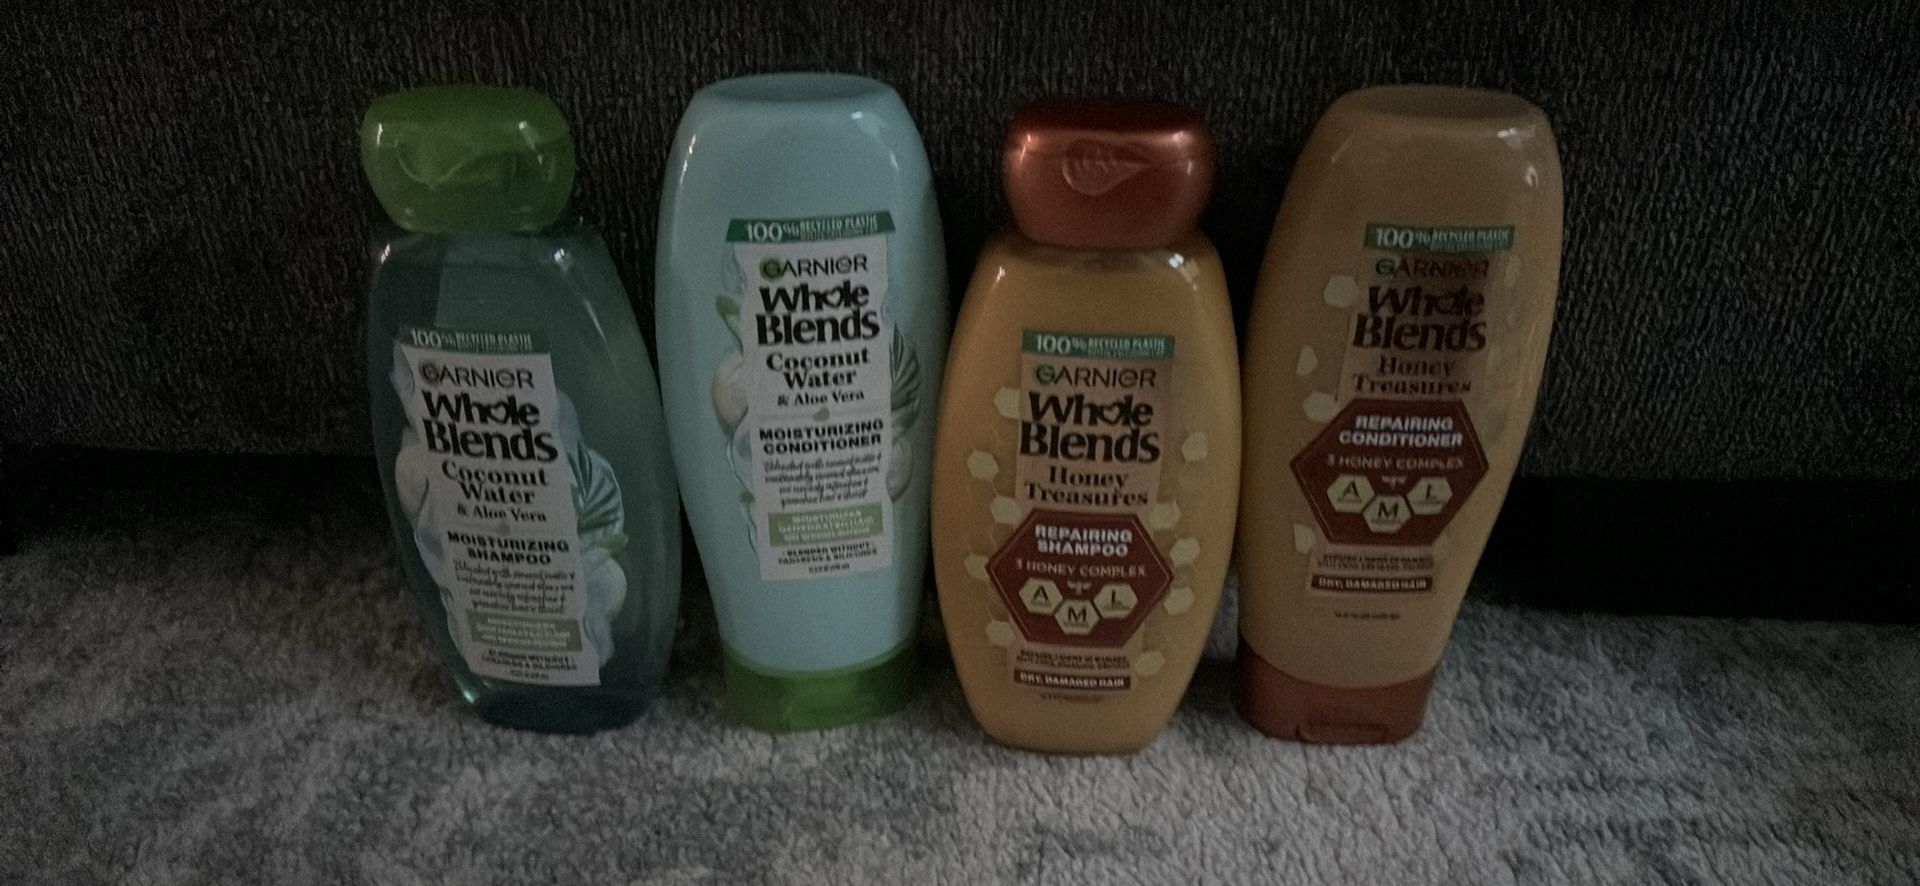 Garnier Whole Blends Shampoo And Conditioner